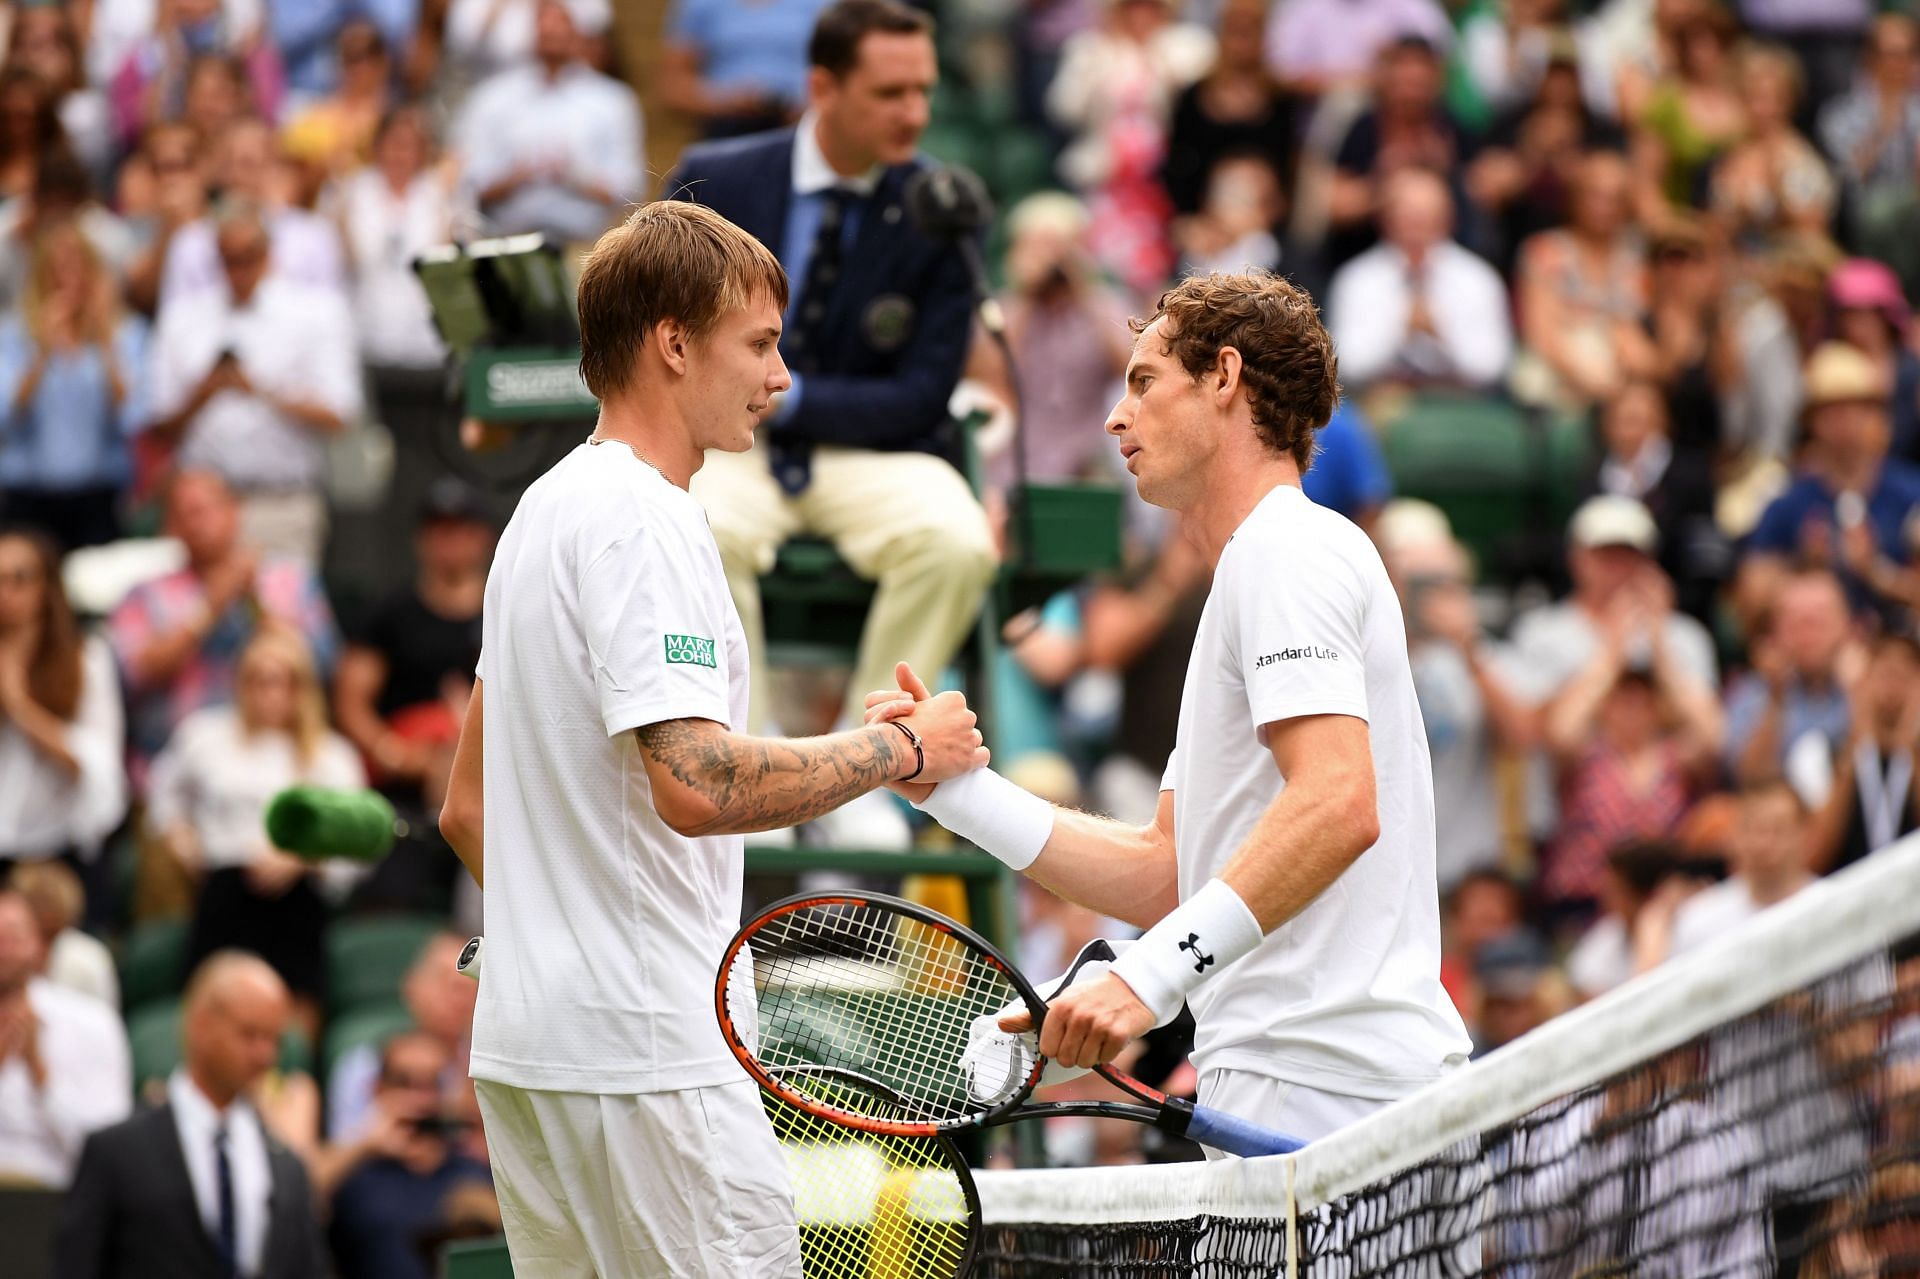 Alexander Bublik and Andy Murray shake hands after their match at the 2017 Wimbledon Championships